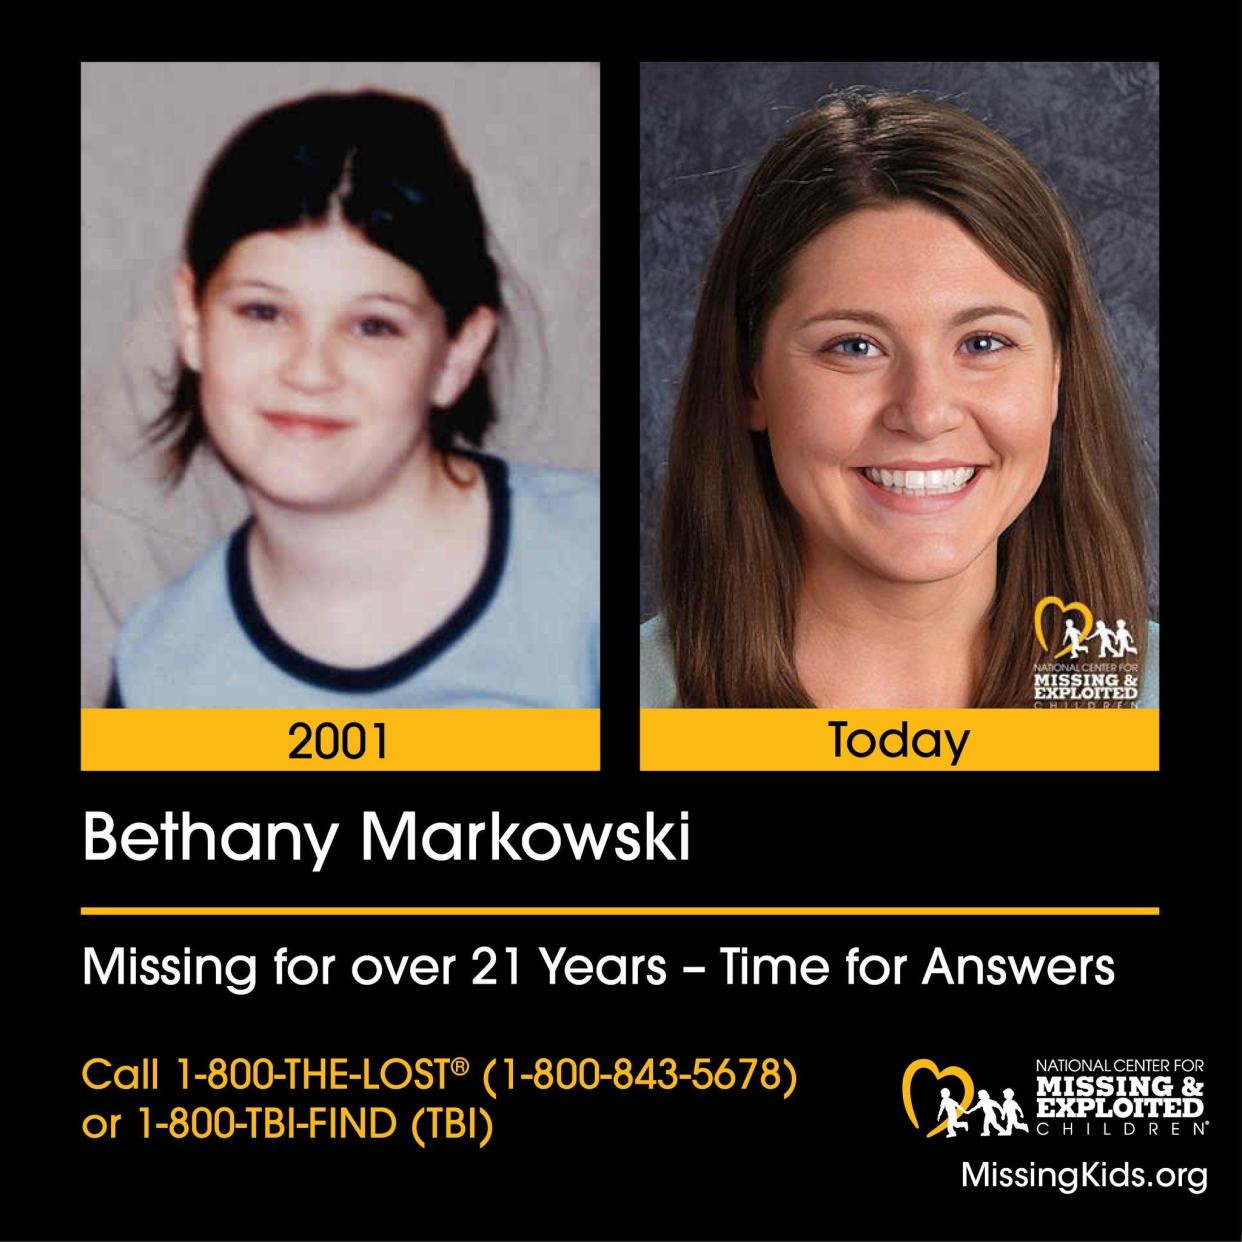 An age projected photo shows what Bethany Markowski, who disappeared from Jackson, Tennessee when she was 11, would look like today at age 32.